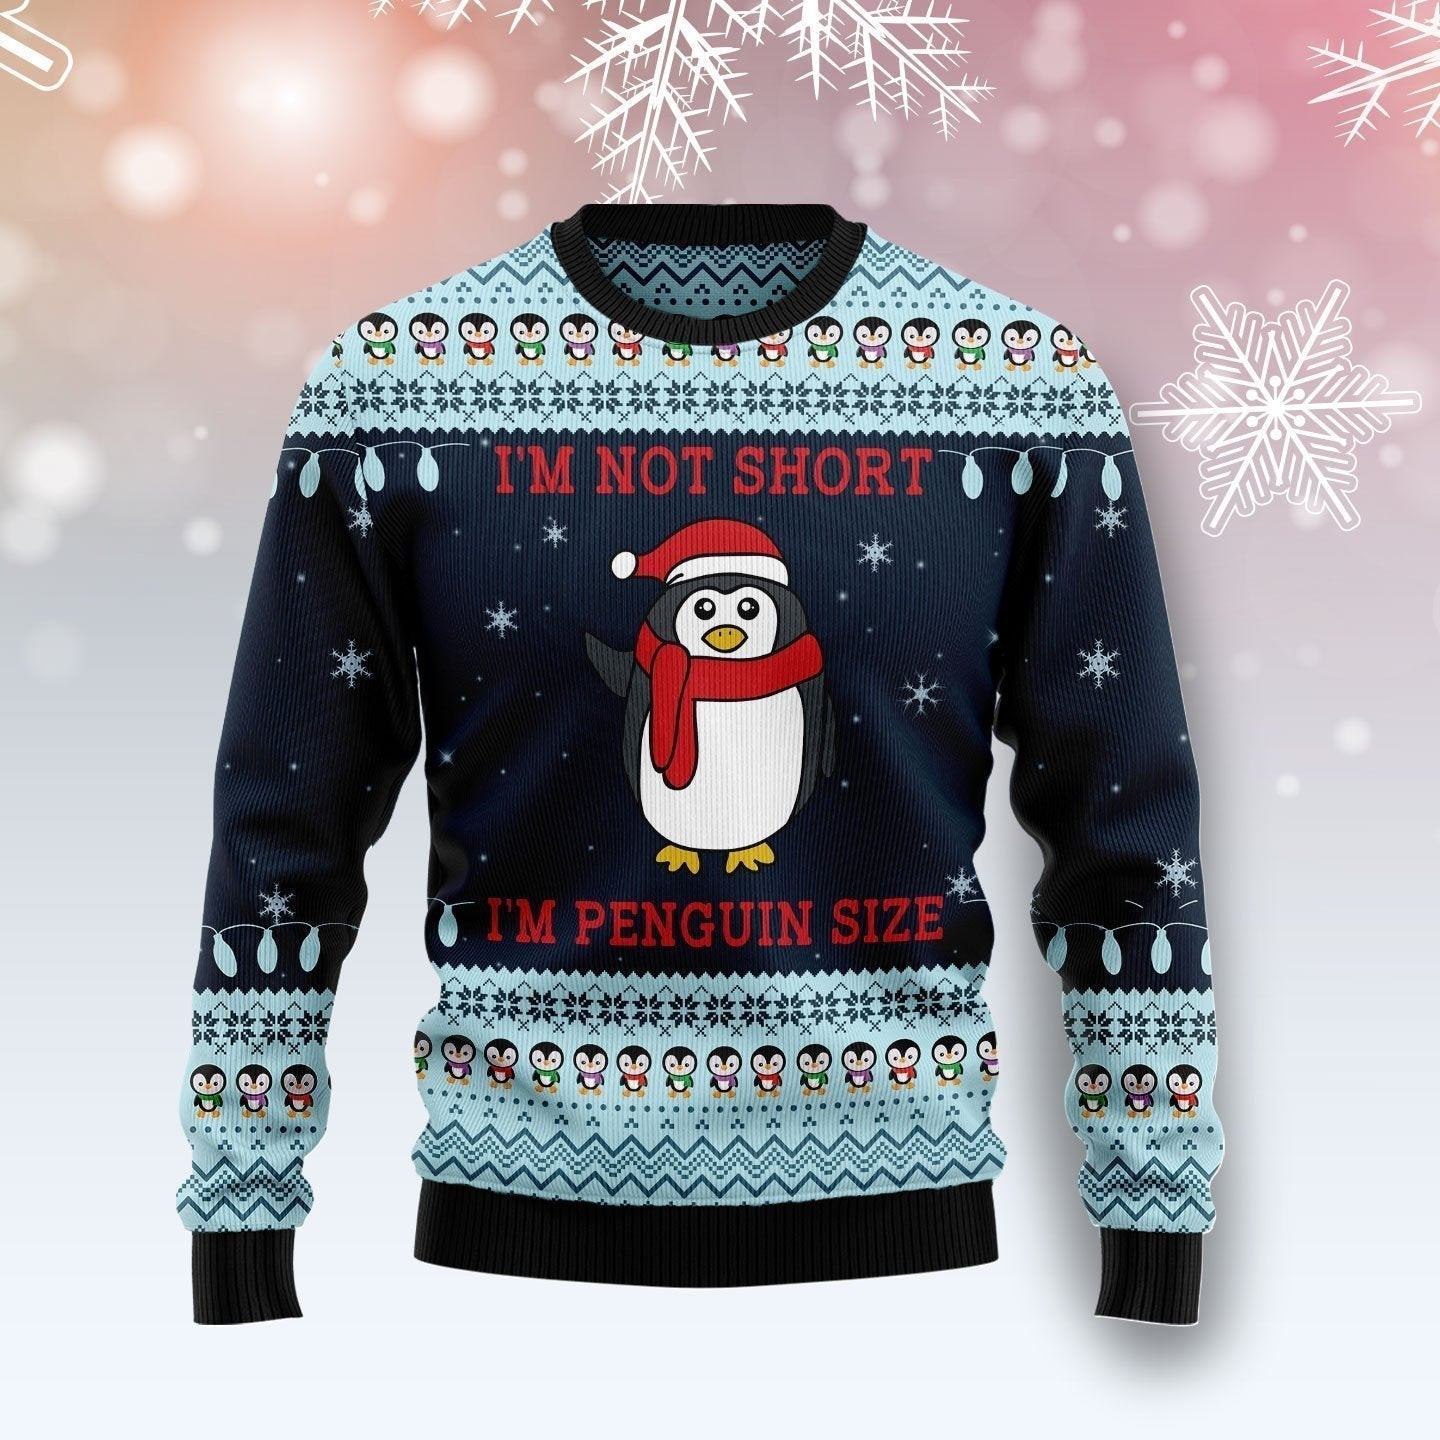 Not Short Penguin Size Ugly Christmas Sweater